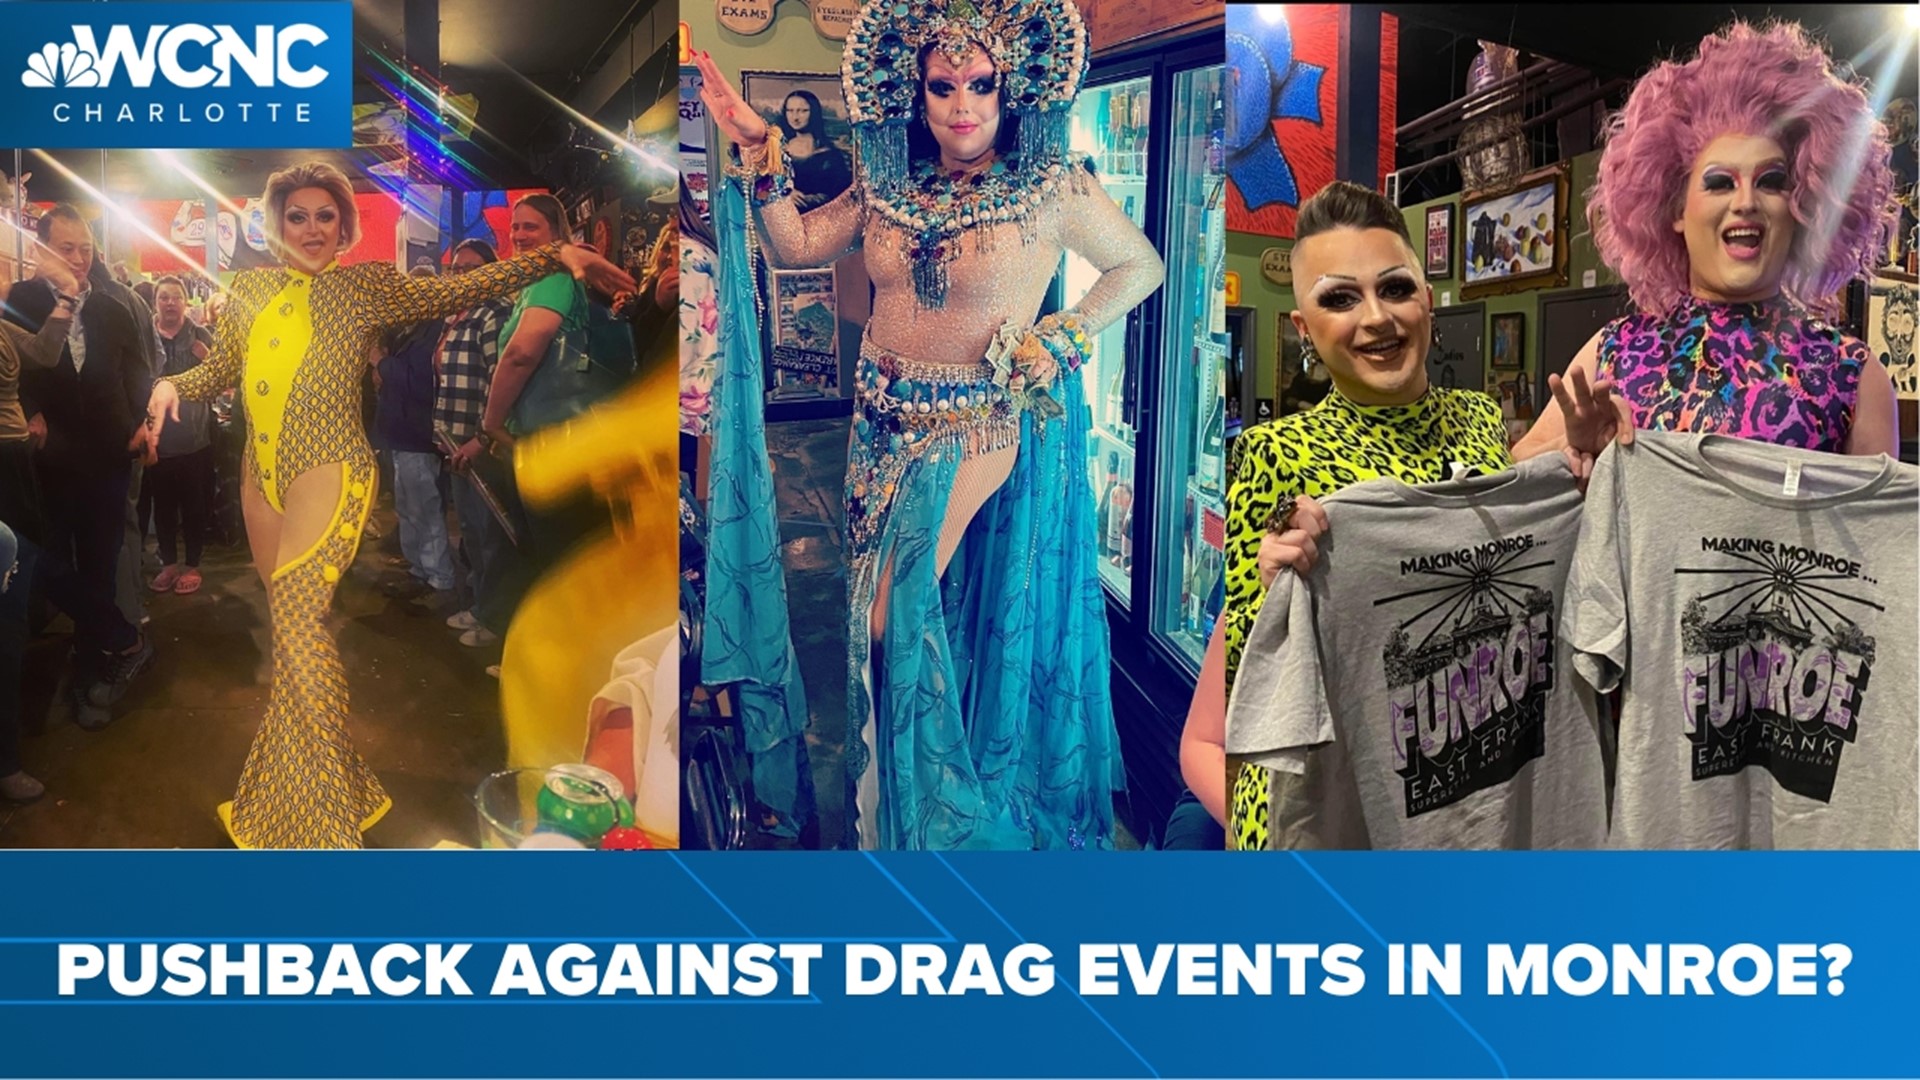 Many are calling for the city of Monroe to shut down a local restaurant because of its drag events.